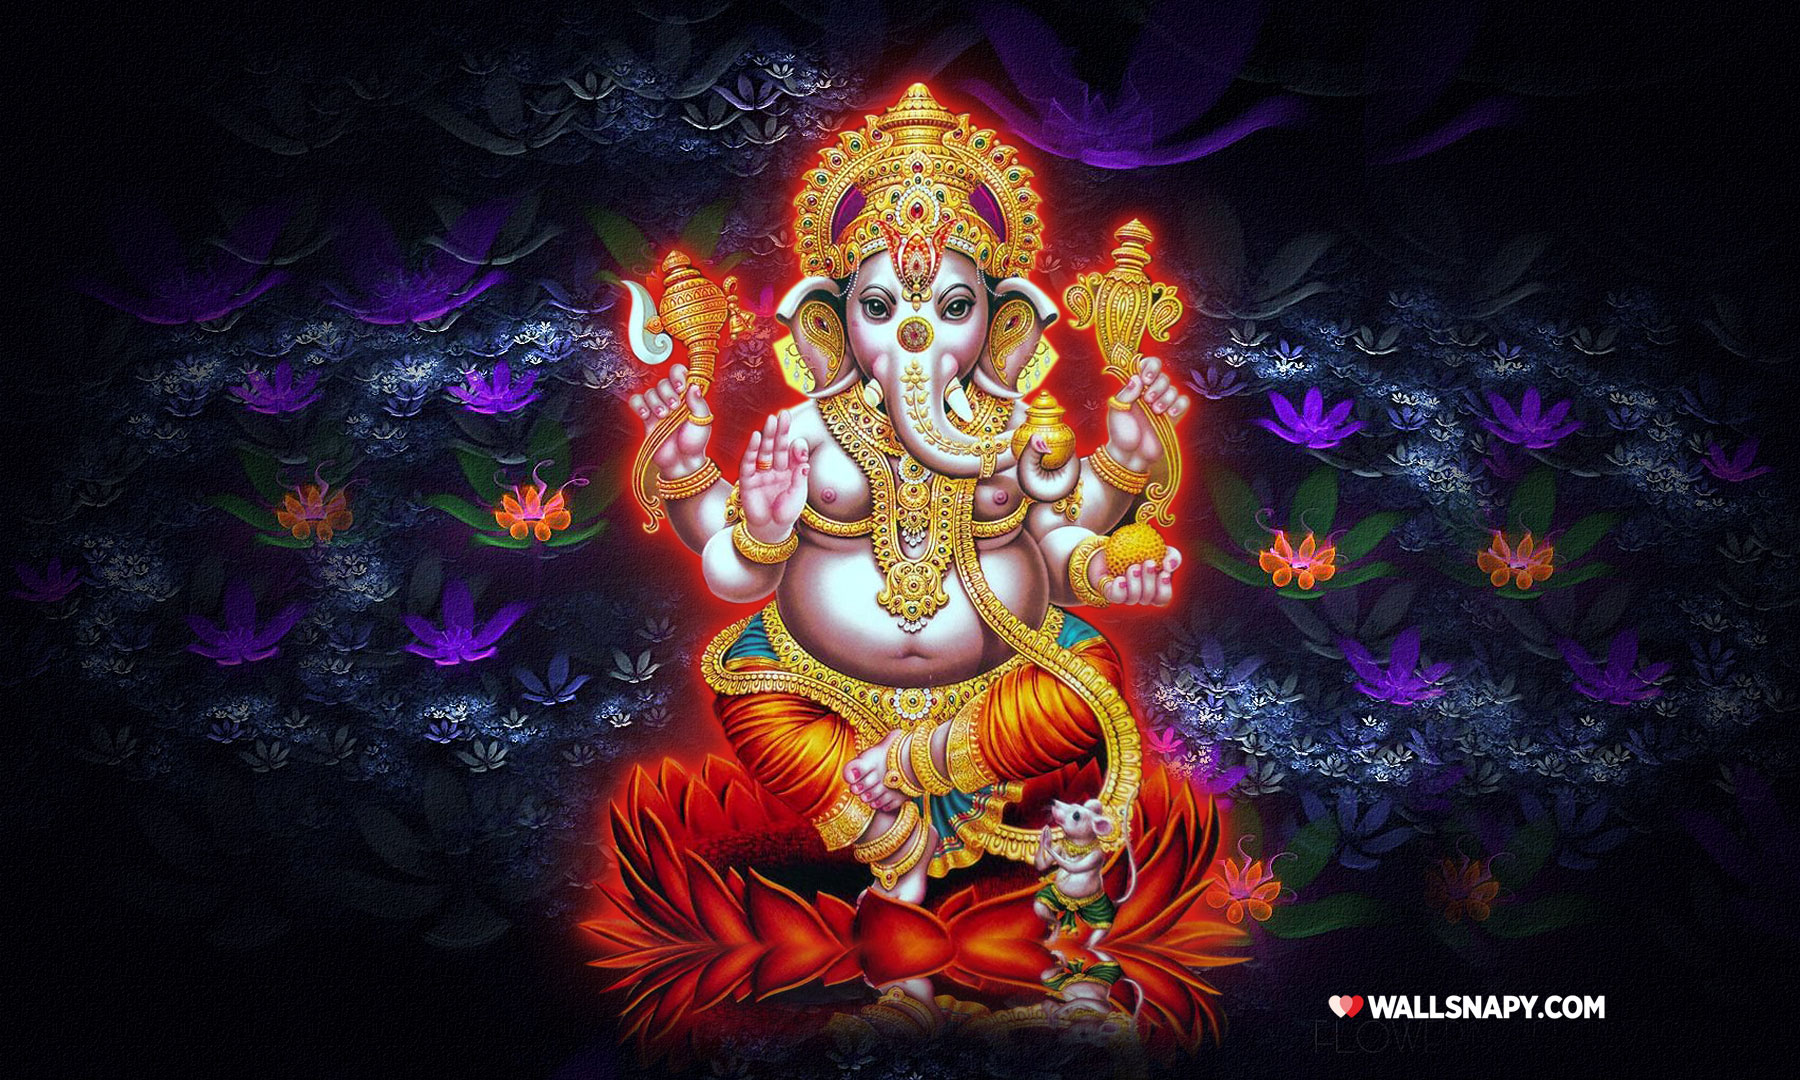 51 Ganesh Wallpaper Stock Video Footage - 4K and HD Video Clips |  Shutterstock